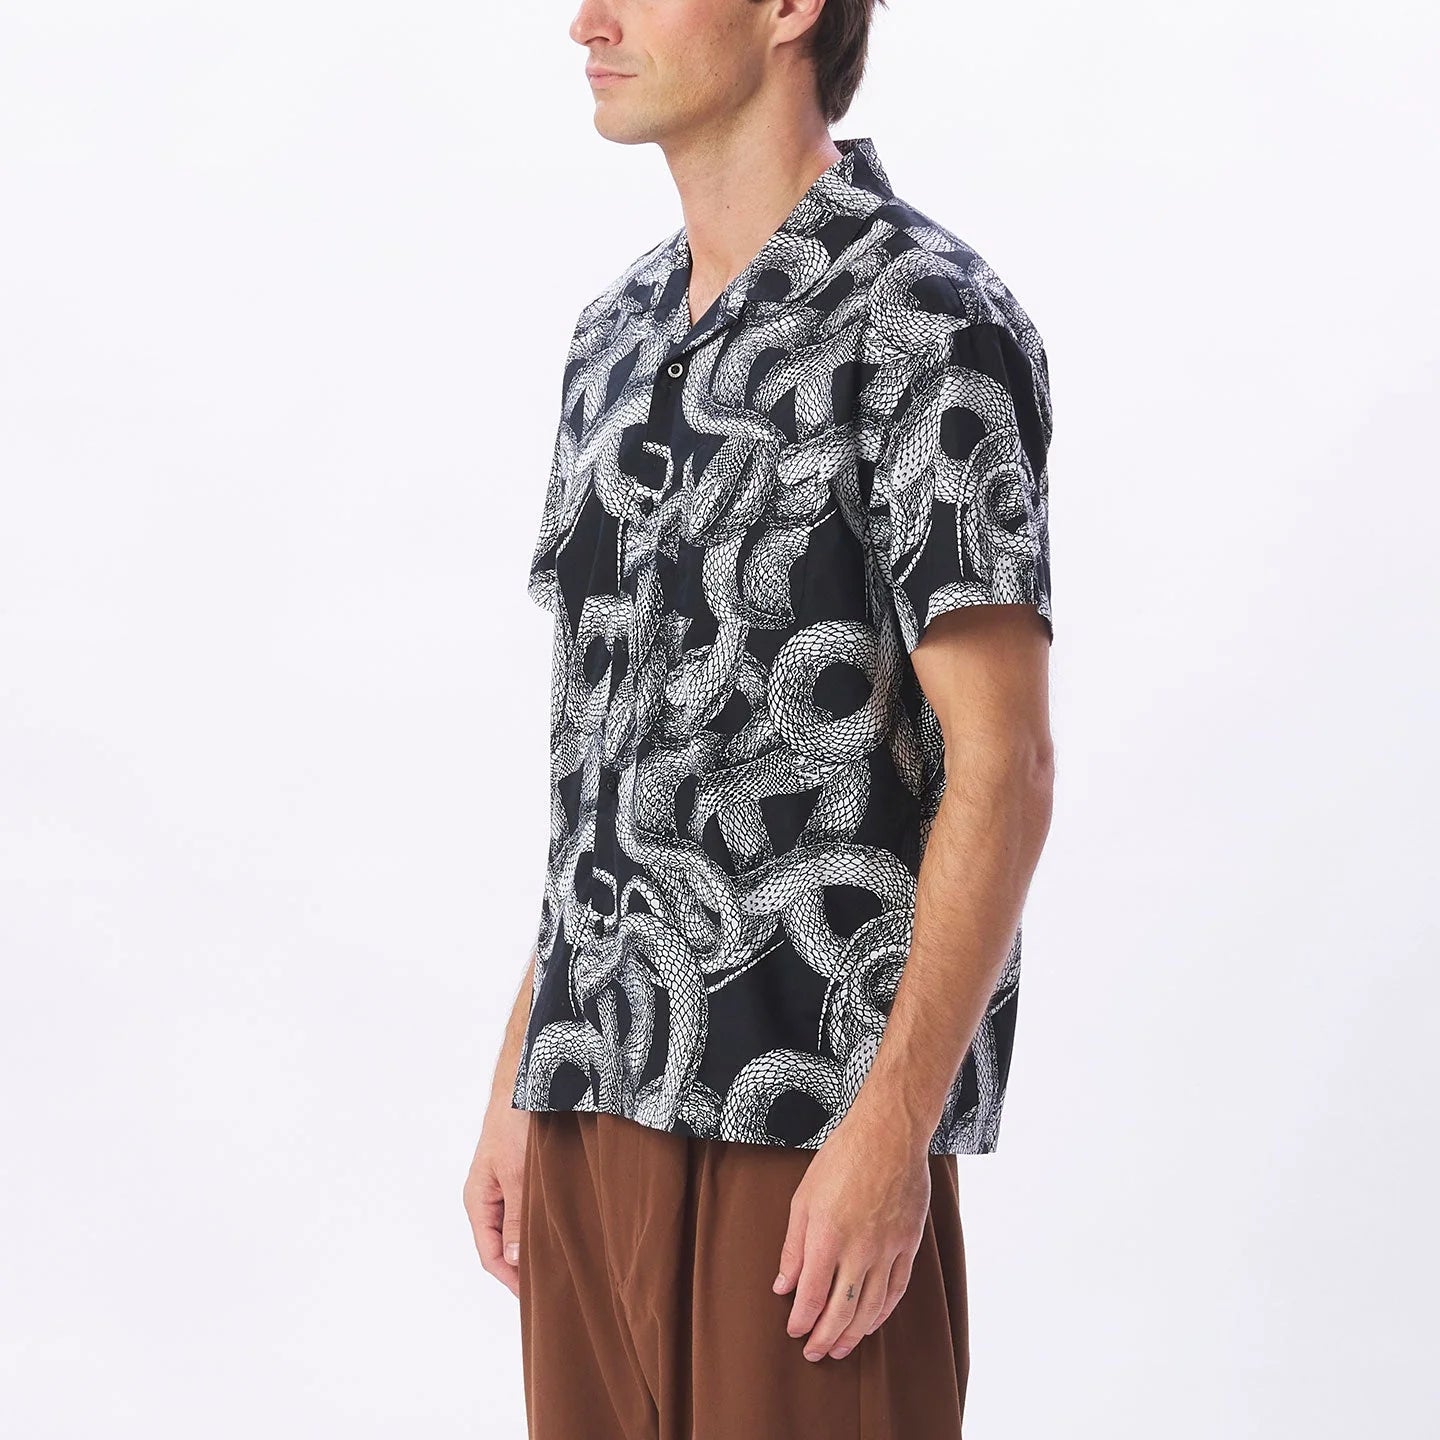 OBEY SLITHER WOVEN SS SHIRT - Black Multi